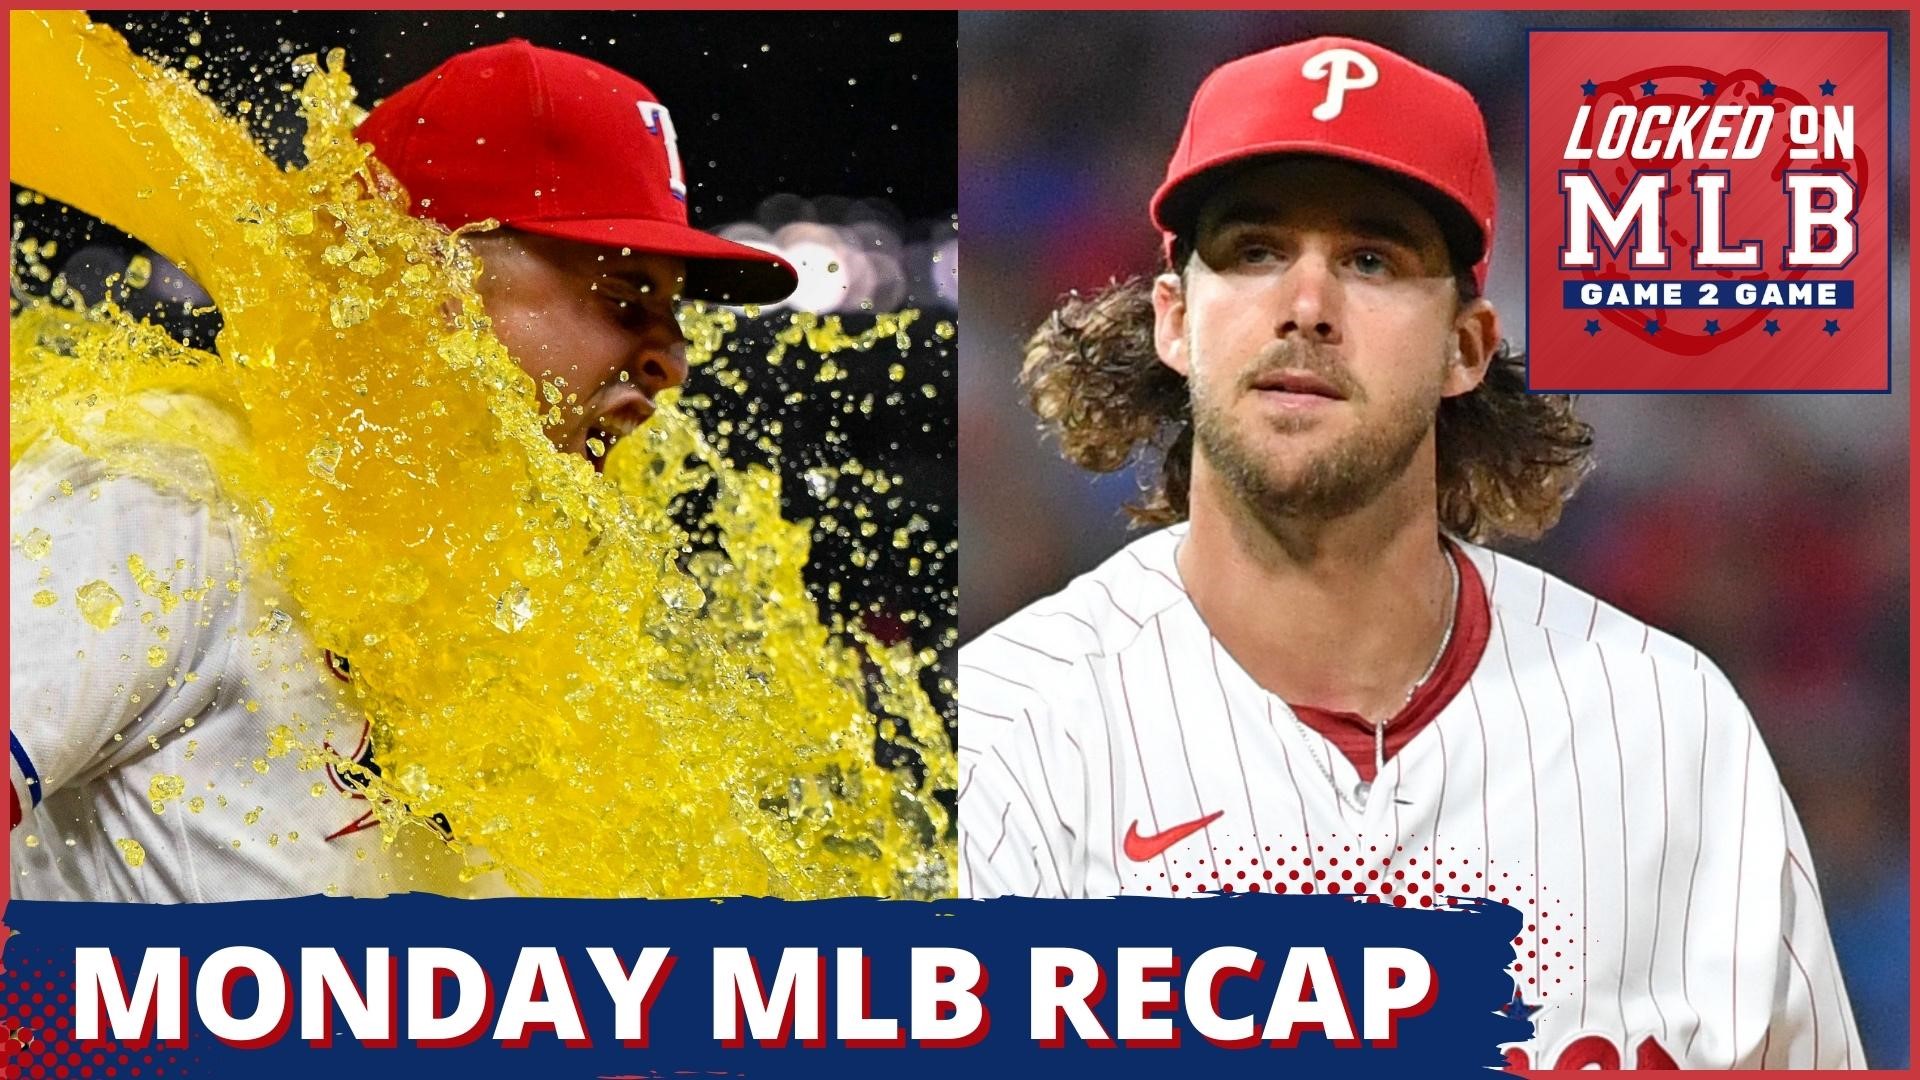 The latest in the MLB from the Rangers getting the walk-off win to the Phillies dominating the Nationals.